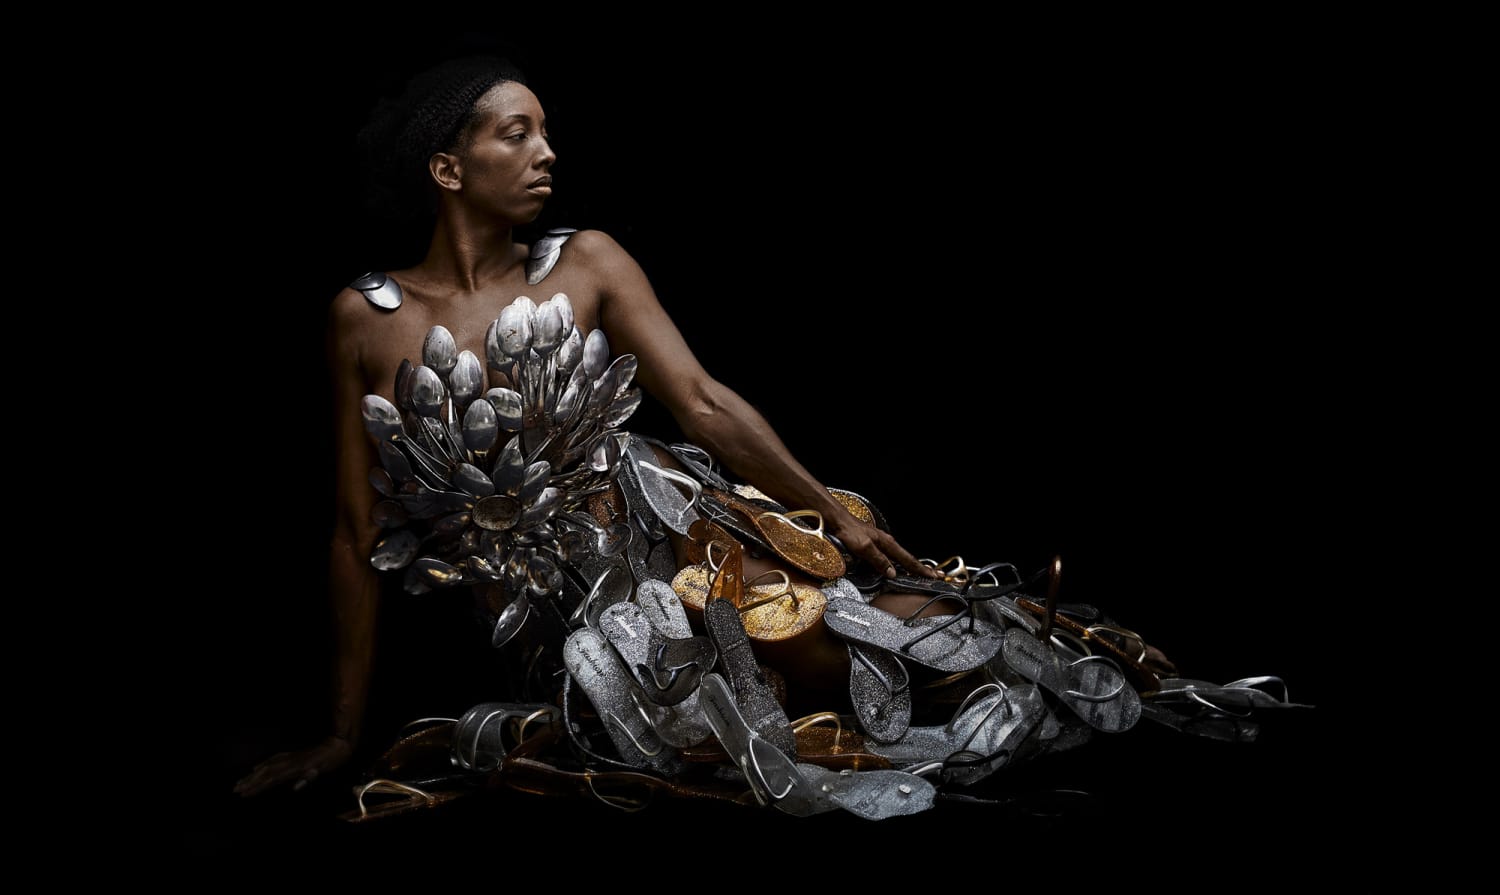 Elegant Portraits by Ayana V. Jackson Are Inspired by African Diasporic Mythology — Colossal